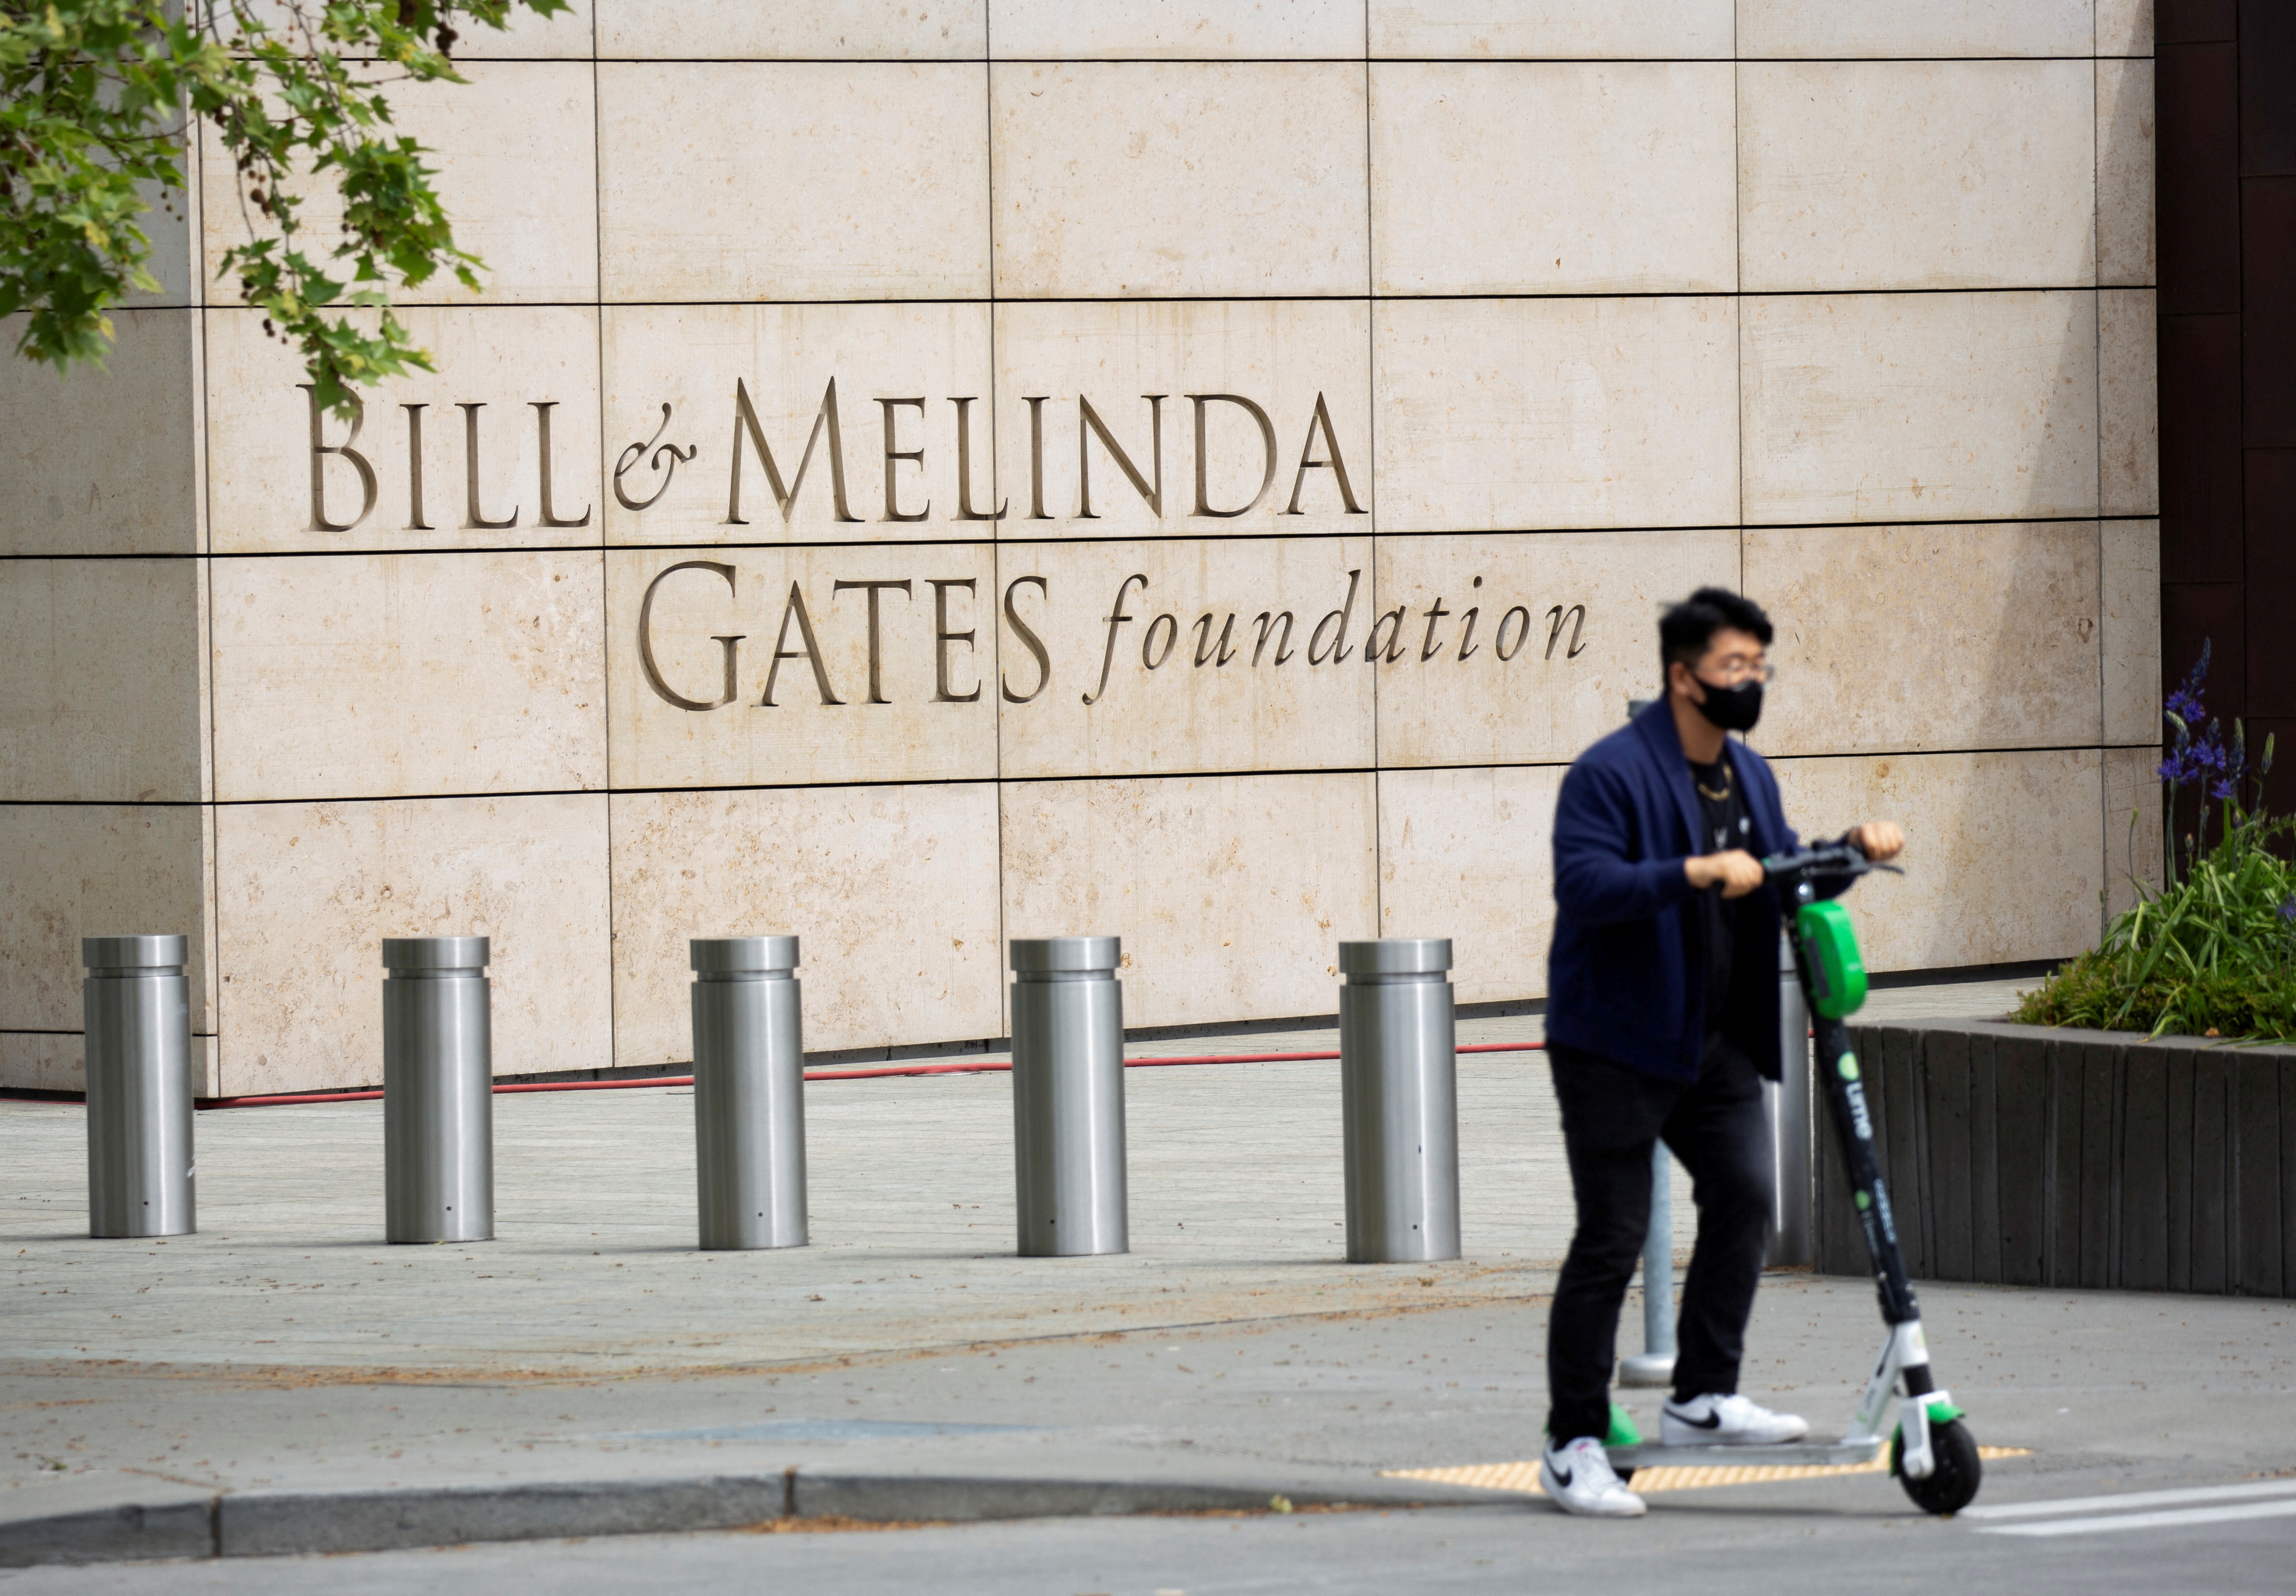 The Bill & Melinda Gates Foundation is pictured in Seattle